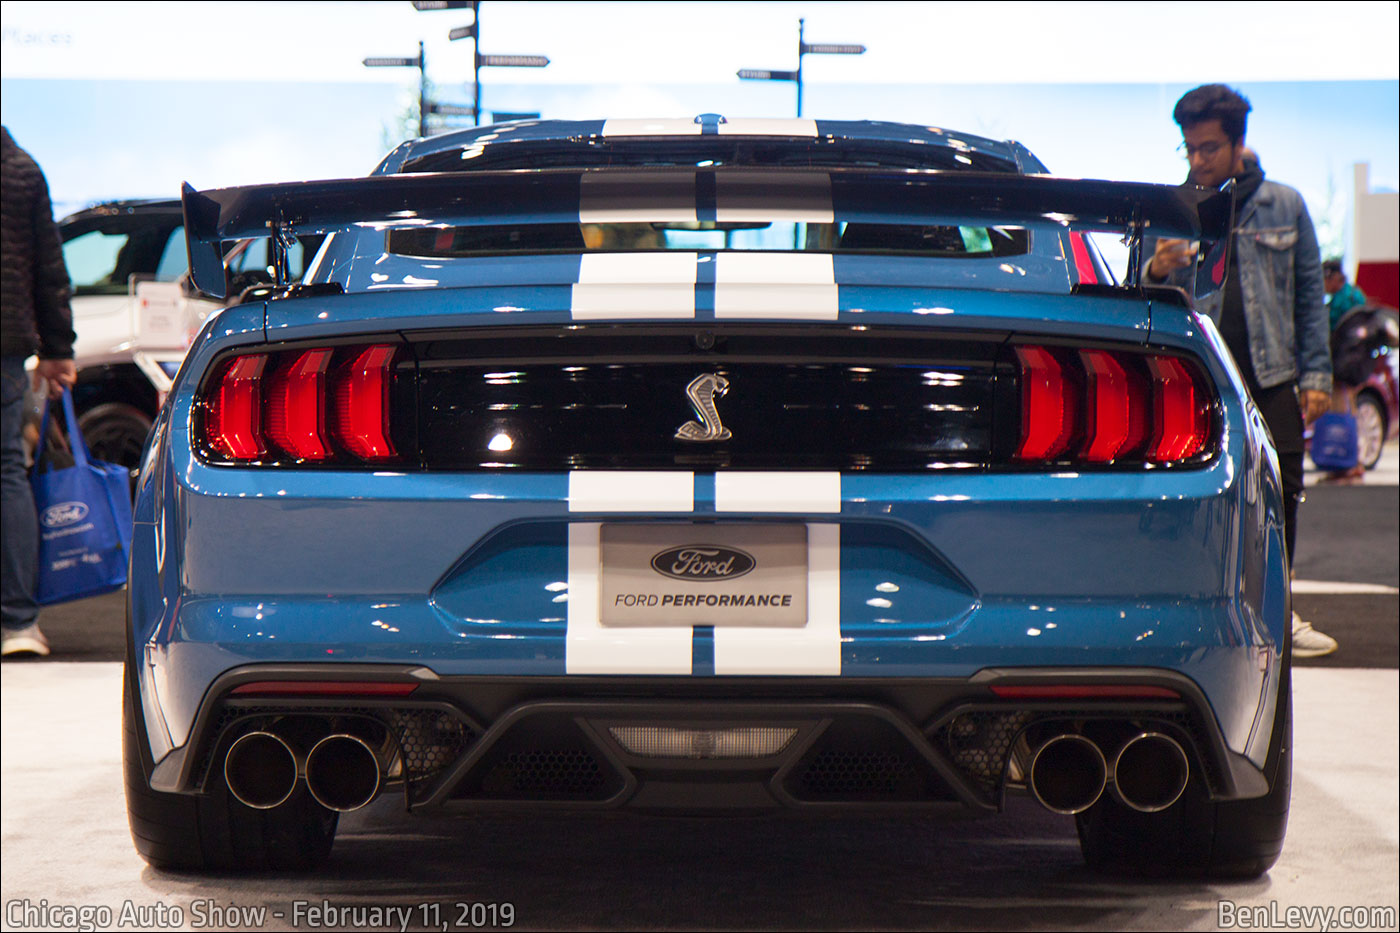 Rear End Of 2020 Ford Mustang Shelby Gt500